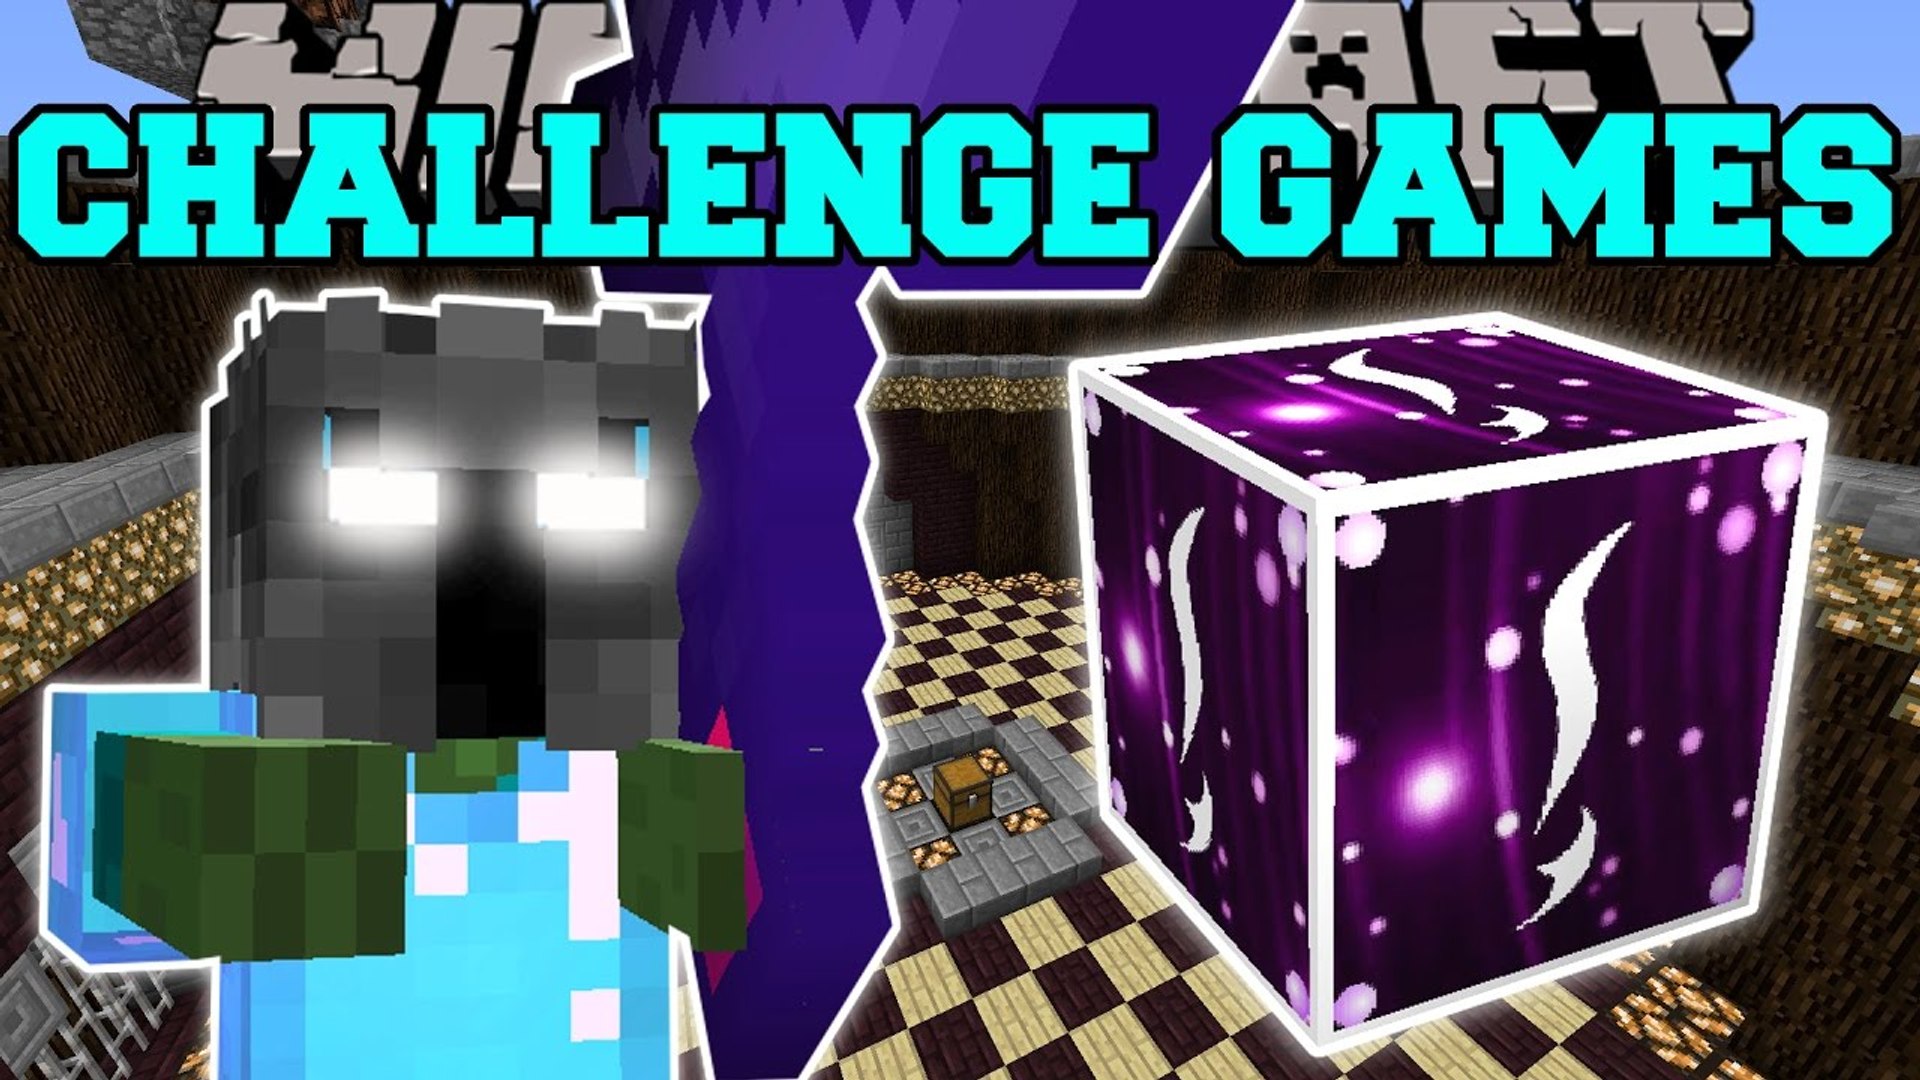 minecraft lucky block challenge with pat and jen